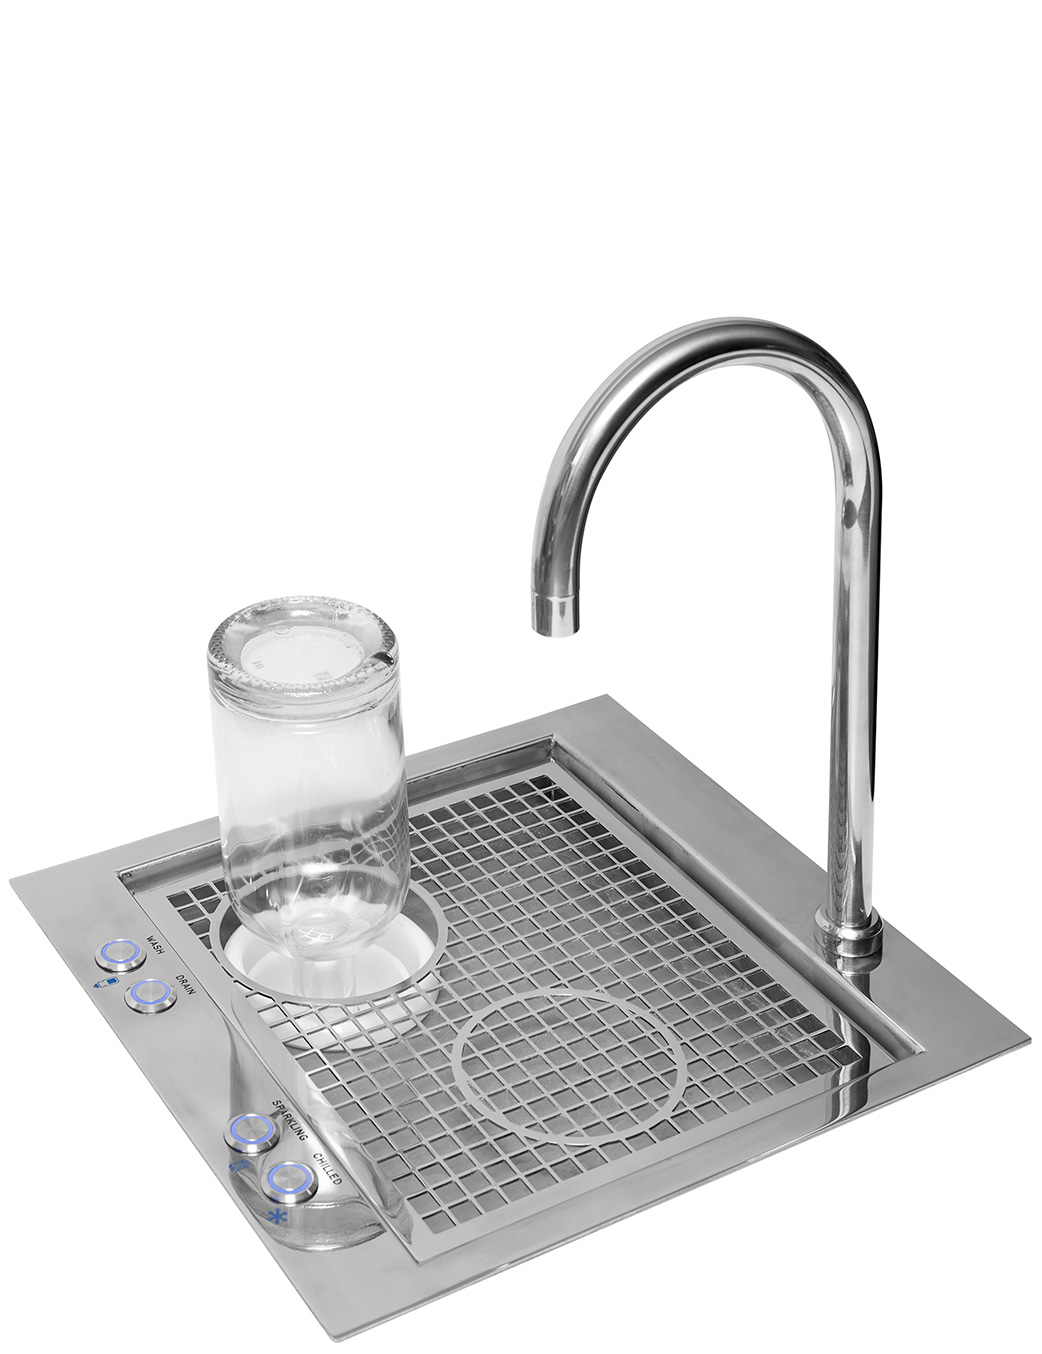 HydreauBar combined bottle wash and refill station